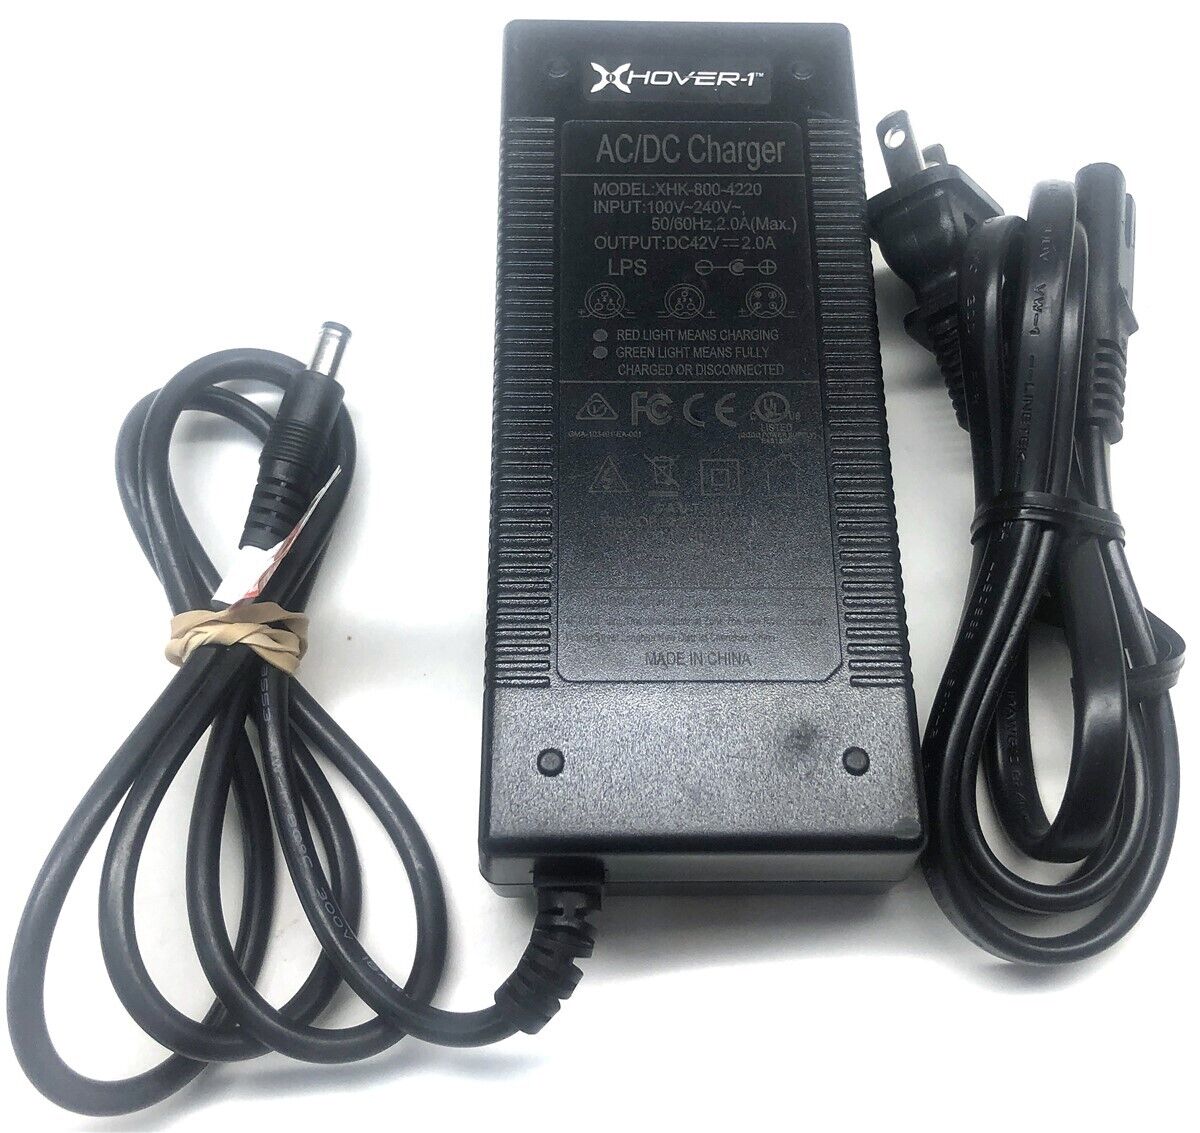 Hover-1 Blackhawk Scooter Charger AC Adapter Power Supply XHK-800-4220 42V 84W Brand Hover-1 Type Switching Power Suppl - Click Image to Close